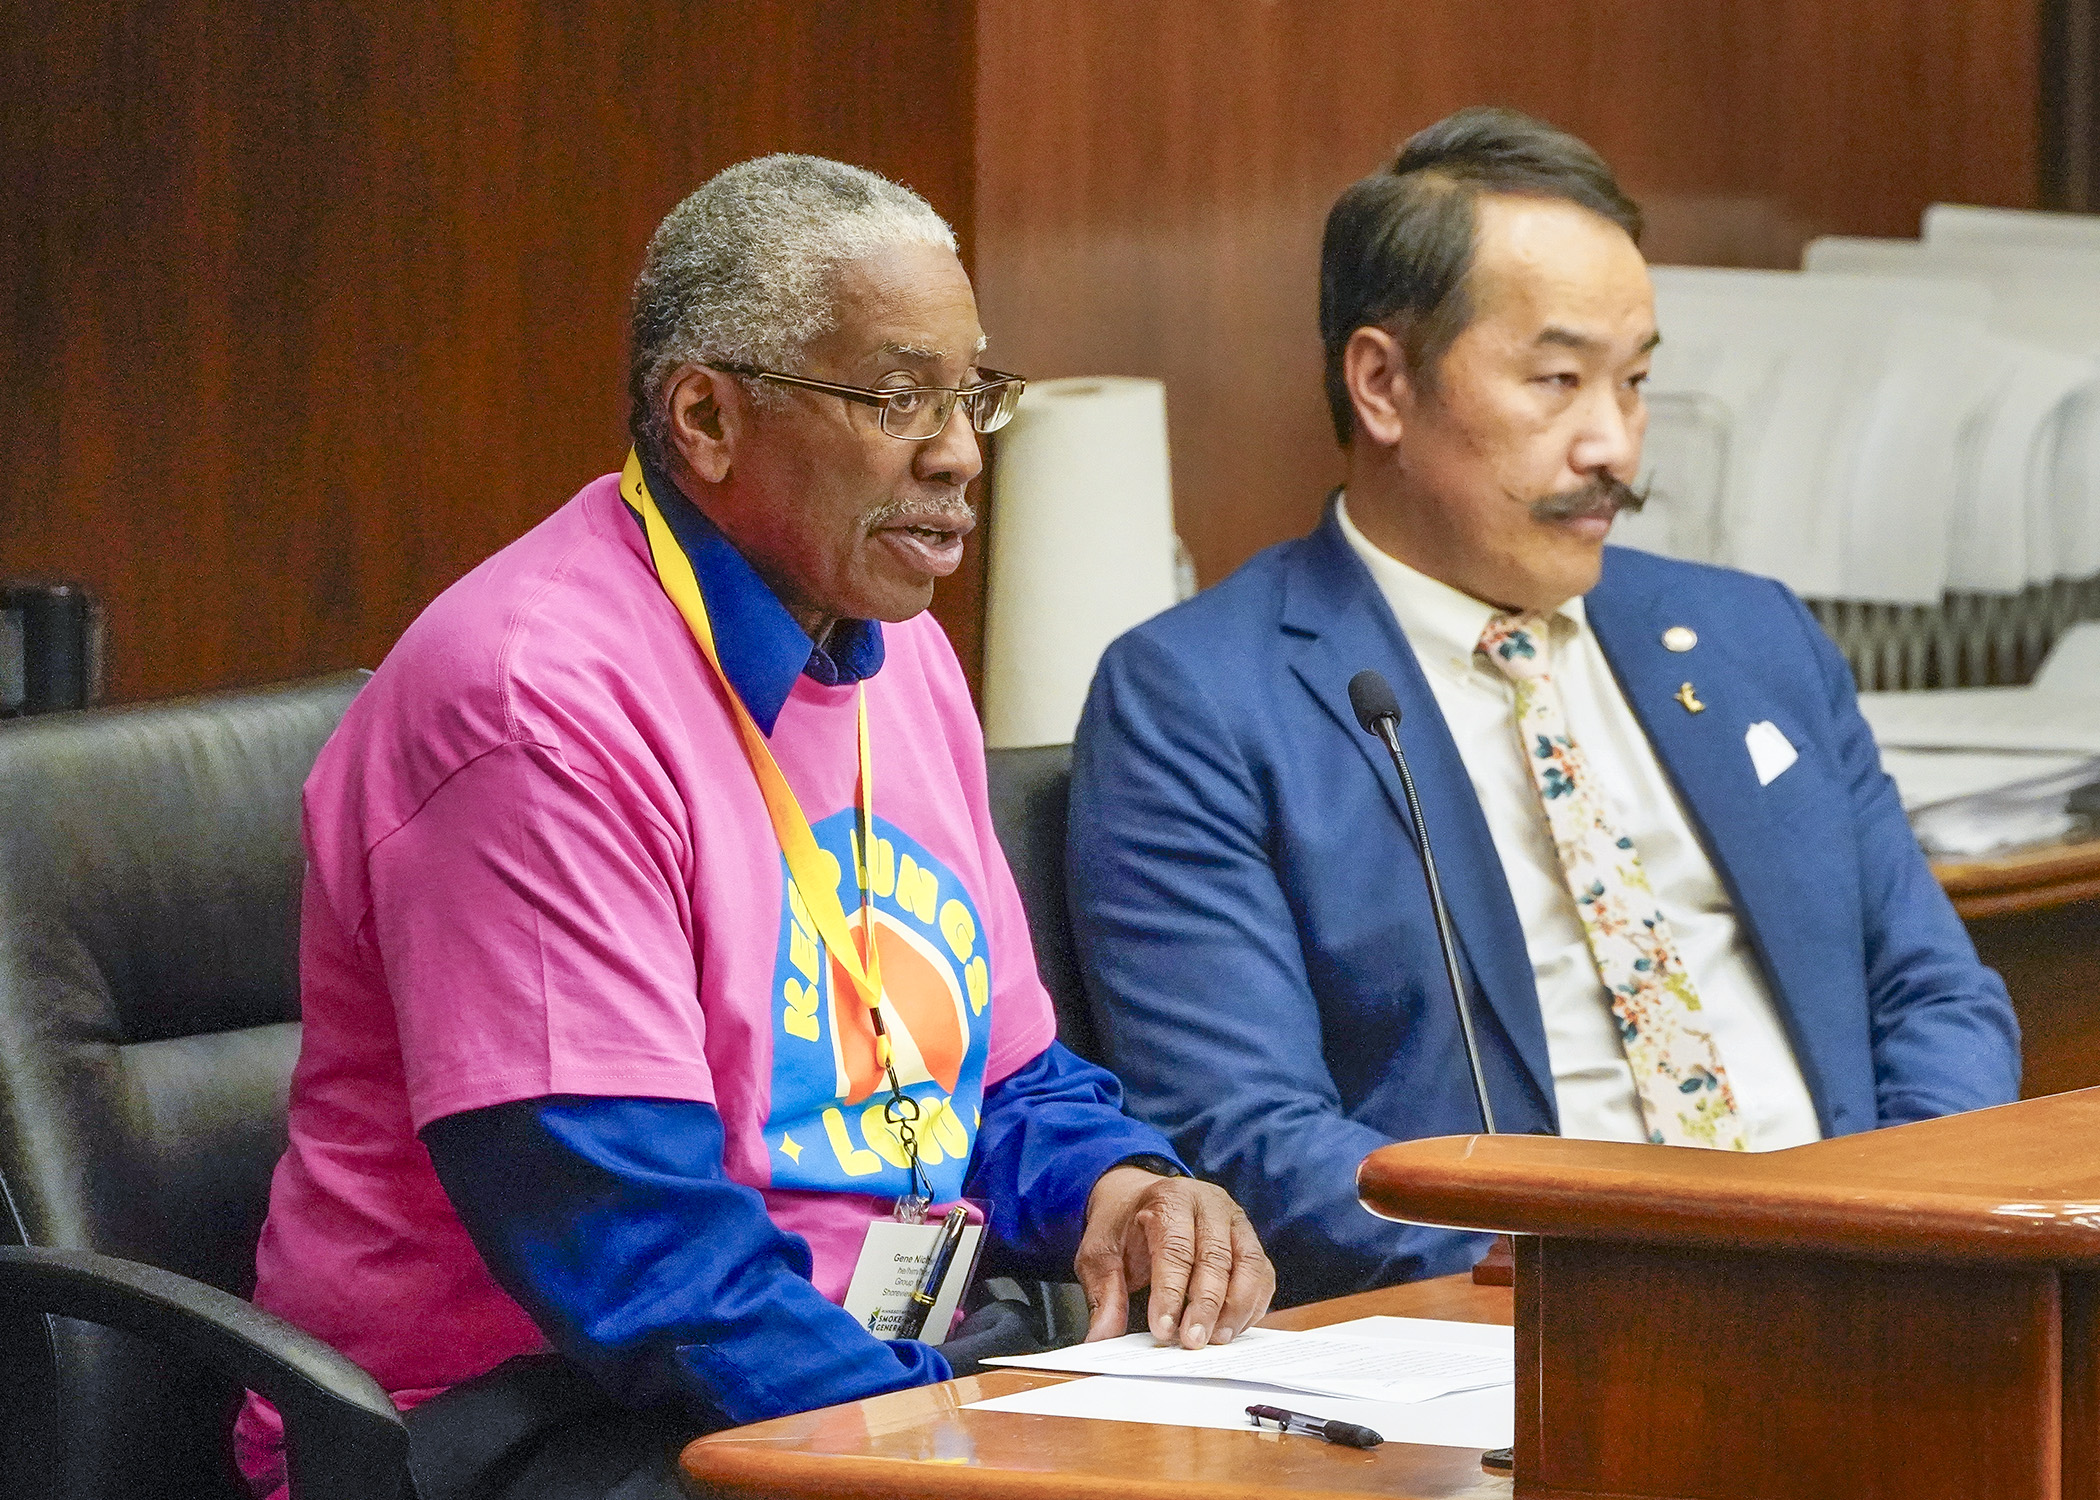 Eugene Nichols of Minnesotans for a Smoke-Free Generation testifies before the House Health Finance and Policy Committee March 5 in support of a bill to prohibit the sale of flavored tobacco, nicotine, or lobelia products. (Photo by Andrew VonBank)